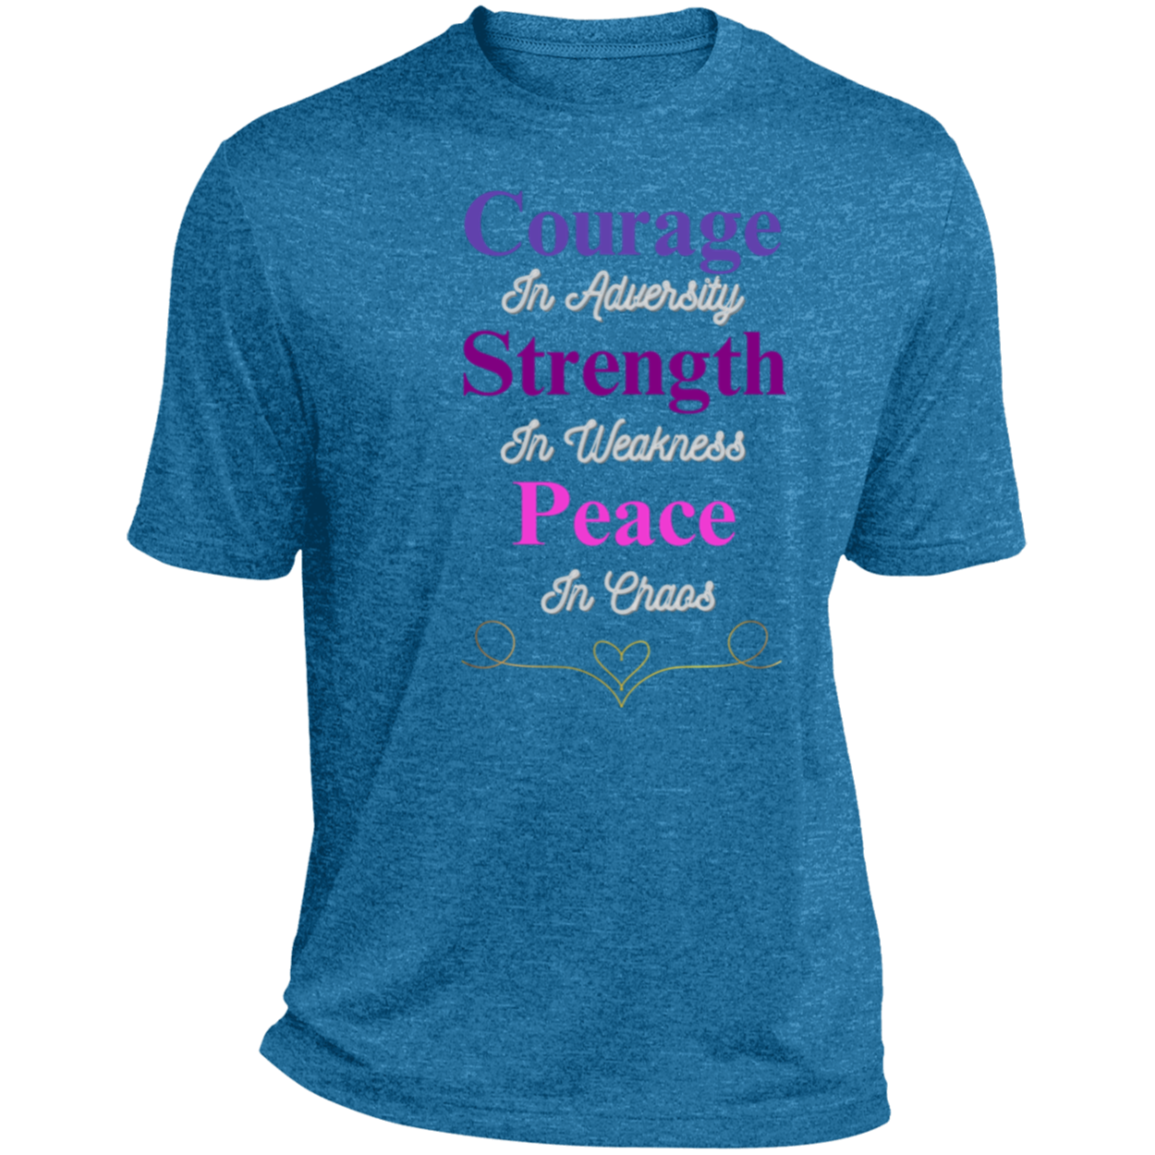 Courage in Adversity Men's T-Shirt| Ultra Breathable, Moisture-Wicking & Snag-Resistant| Short Sleeves